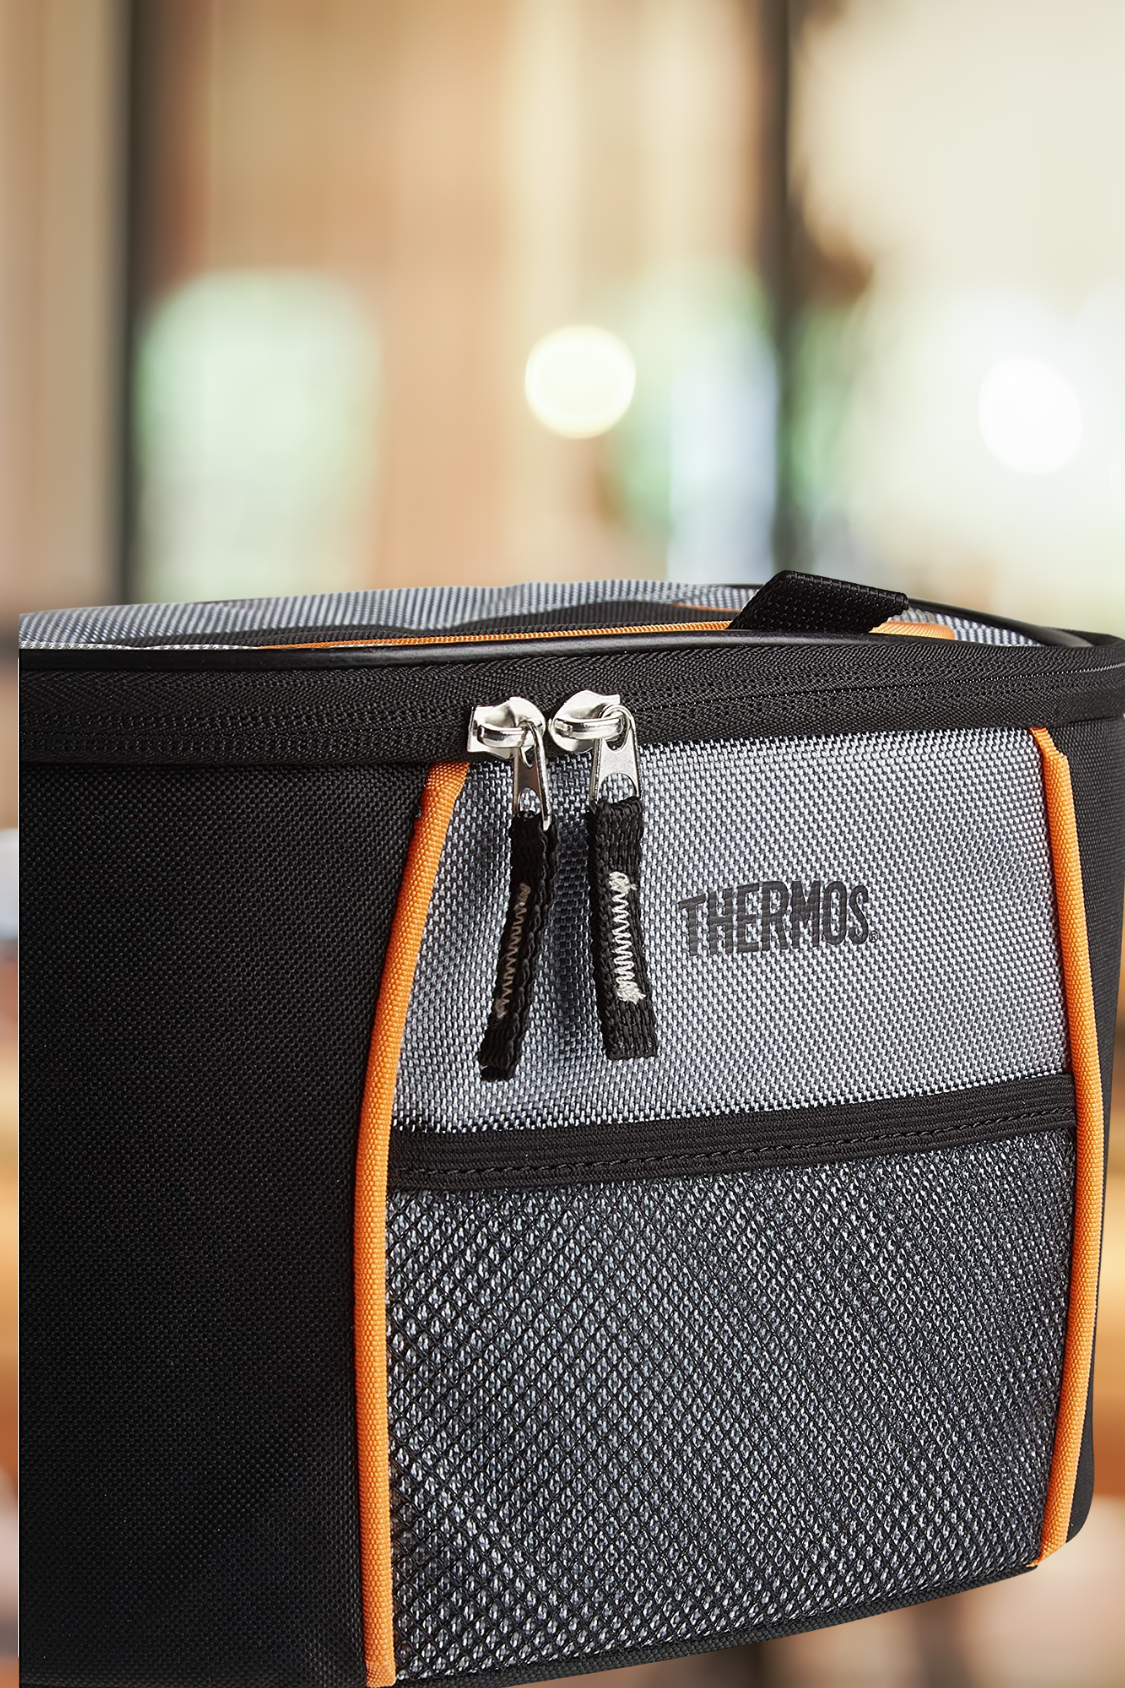 Thermos Element5 6 Can Cooler, Lunch Bag - Black | GreenLifeHuman Emporium